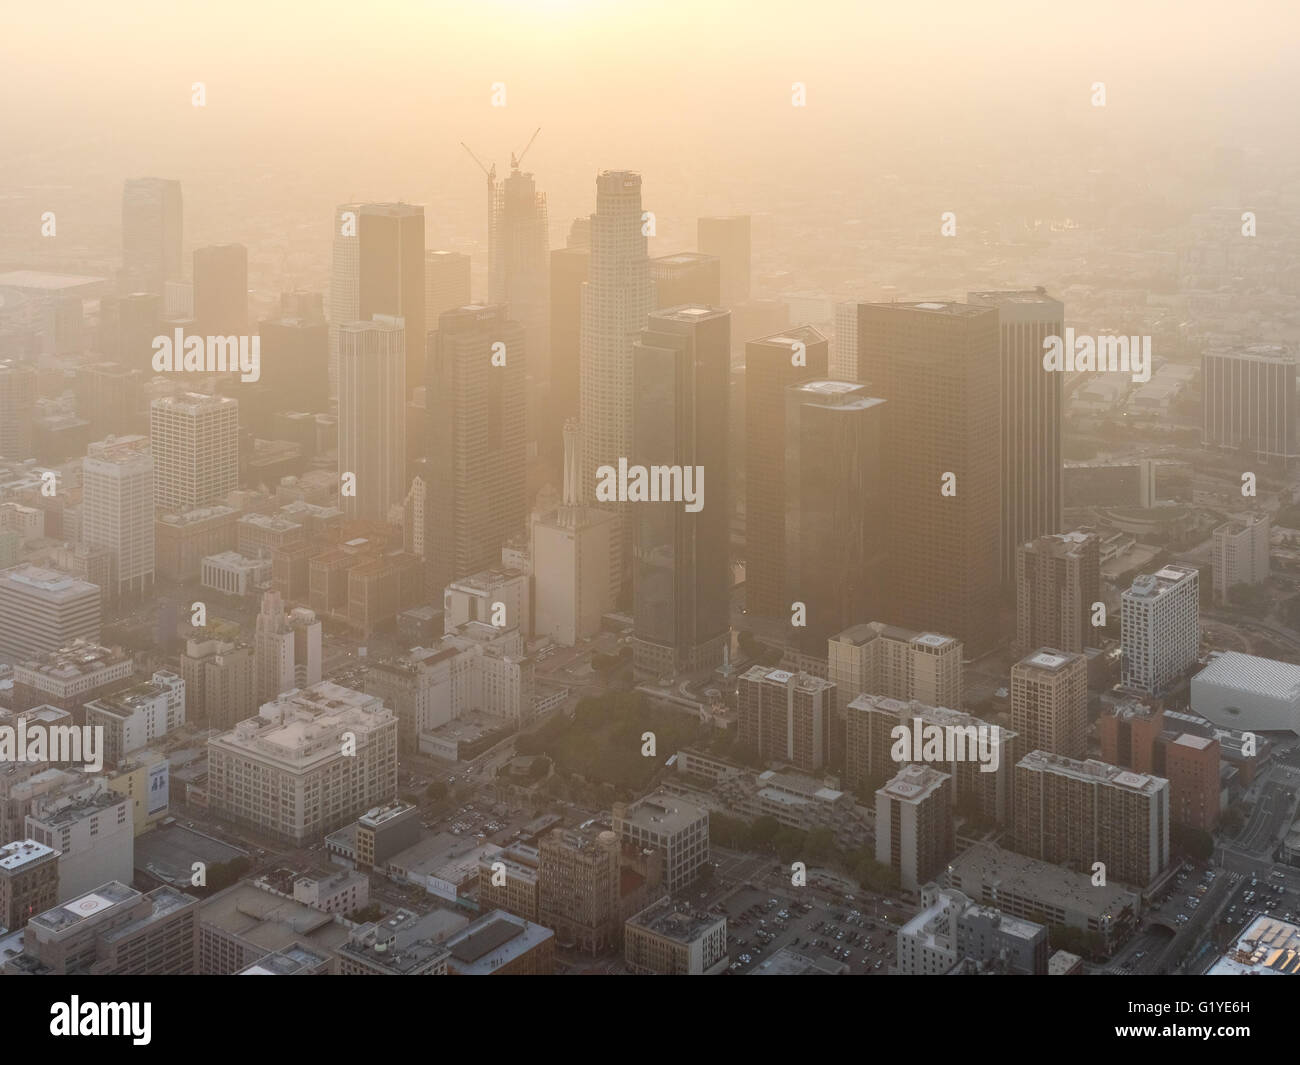 Skyscrapers of downtown Los Angeles in haze, smog, Los Angeles, Los Angeles County, California, USA Stock Photo